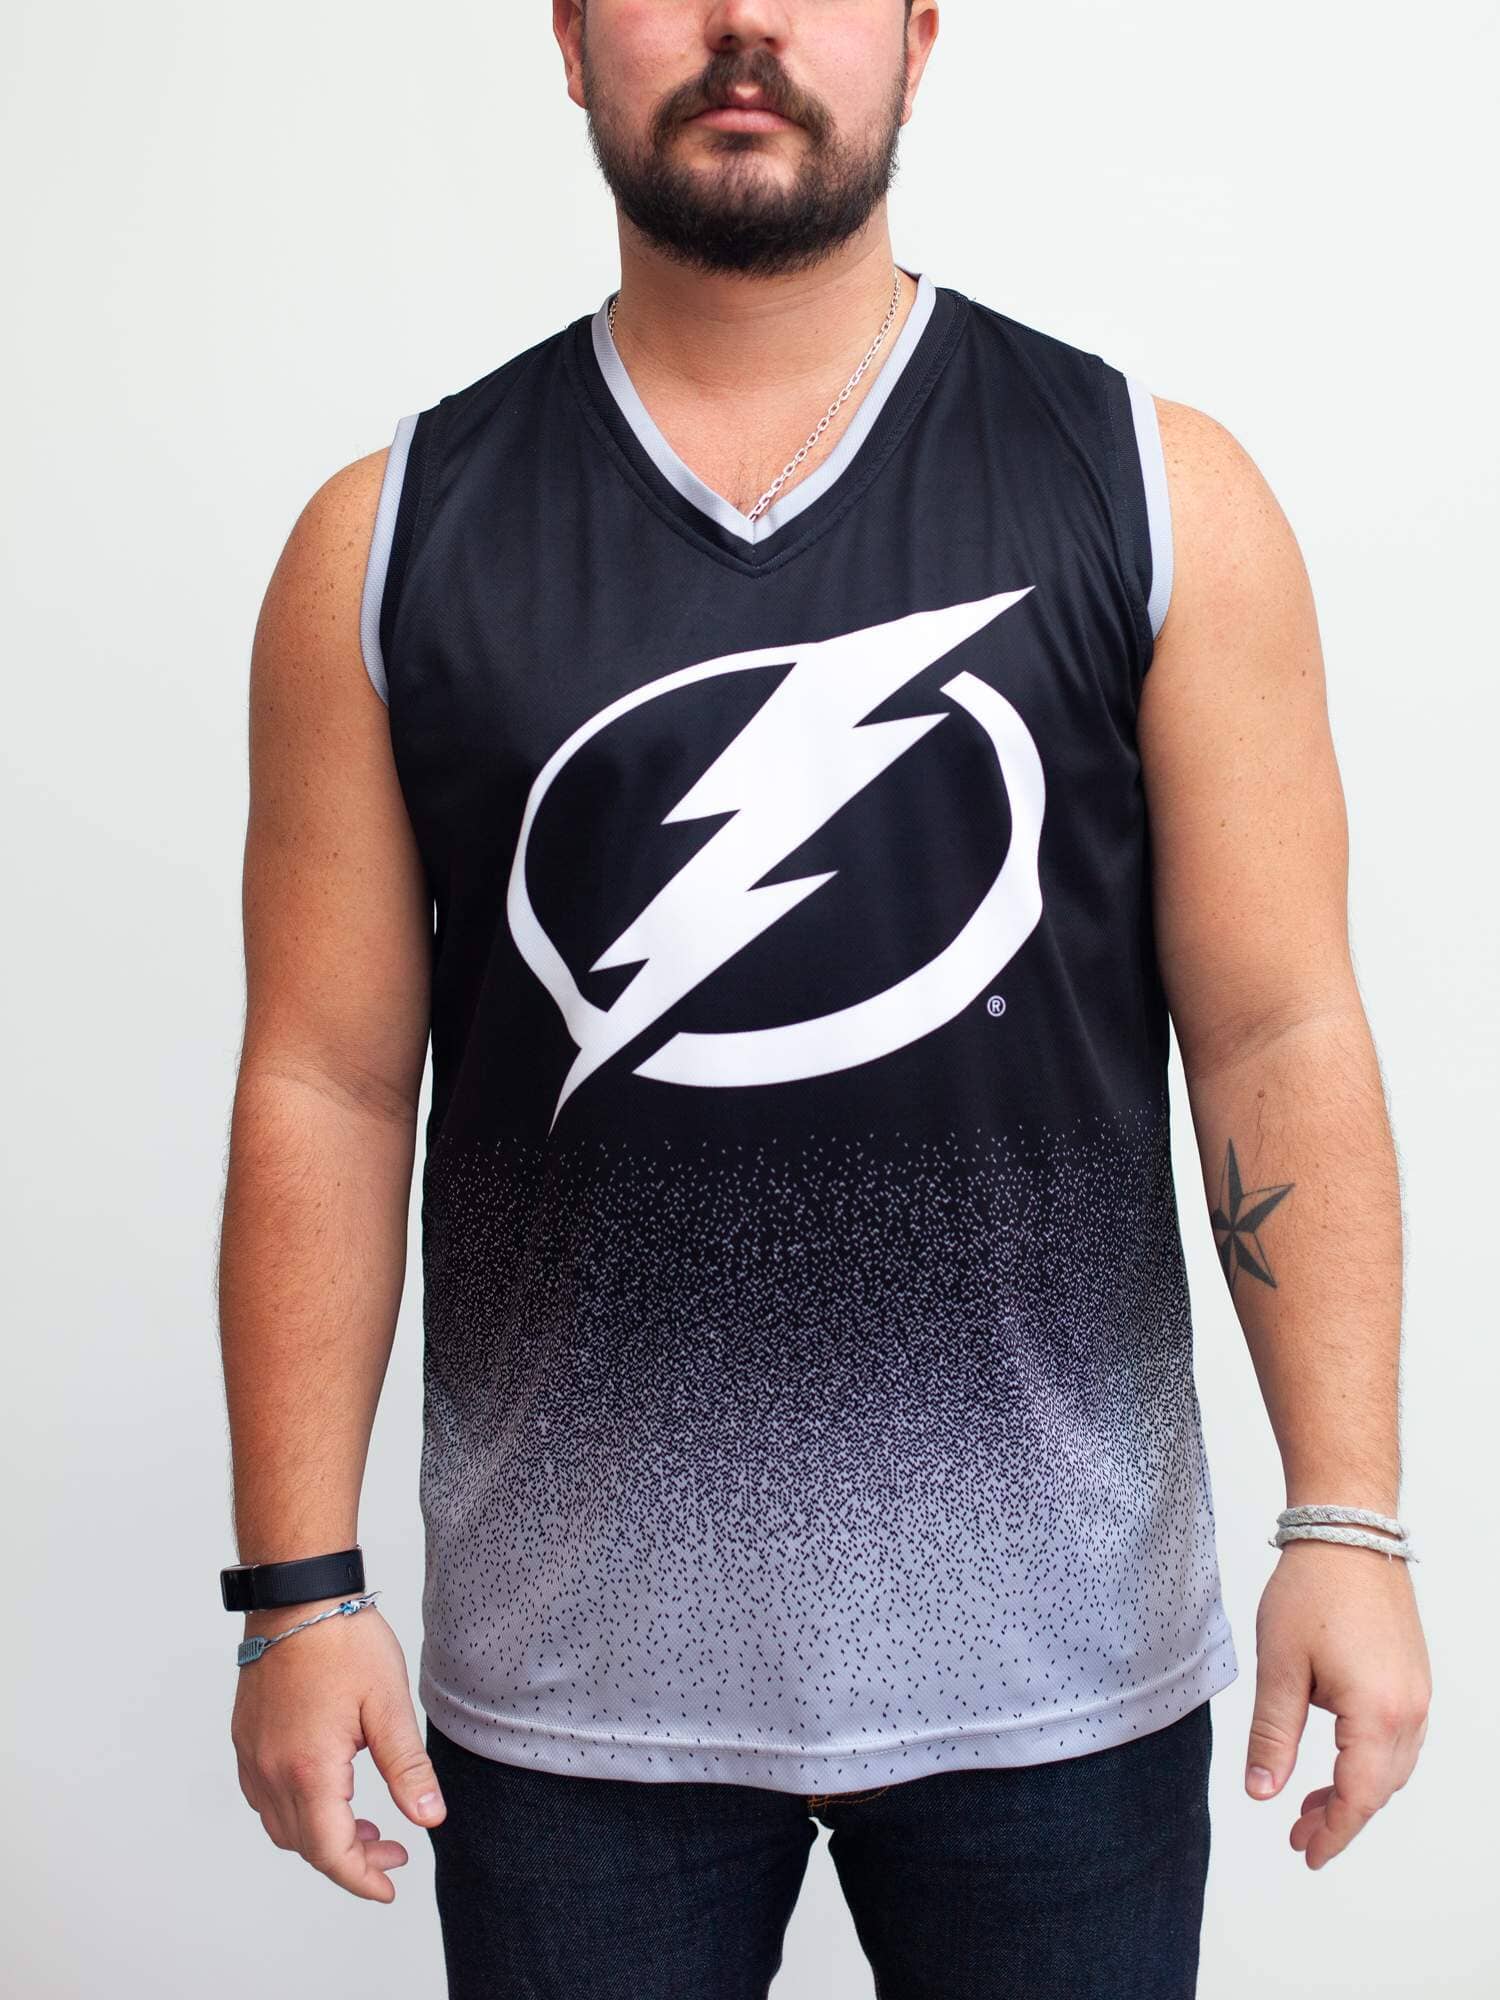 Lightning Round: check out the Bolts Reverse Retro jersey and